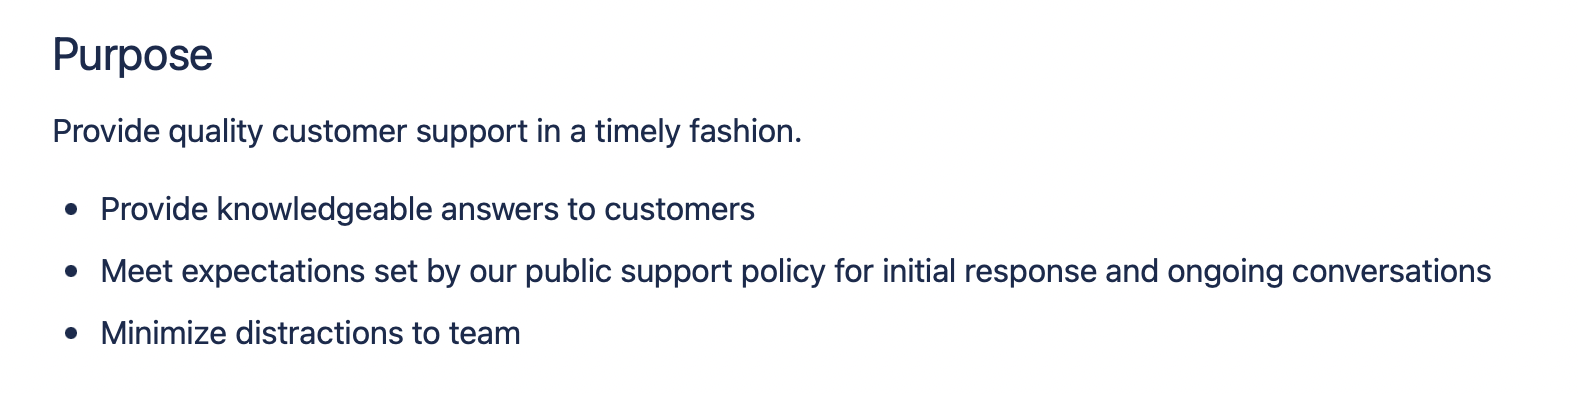 description from support policy